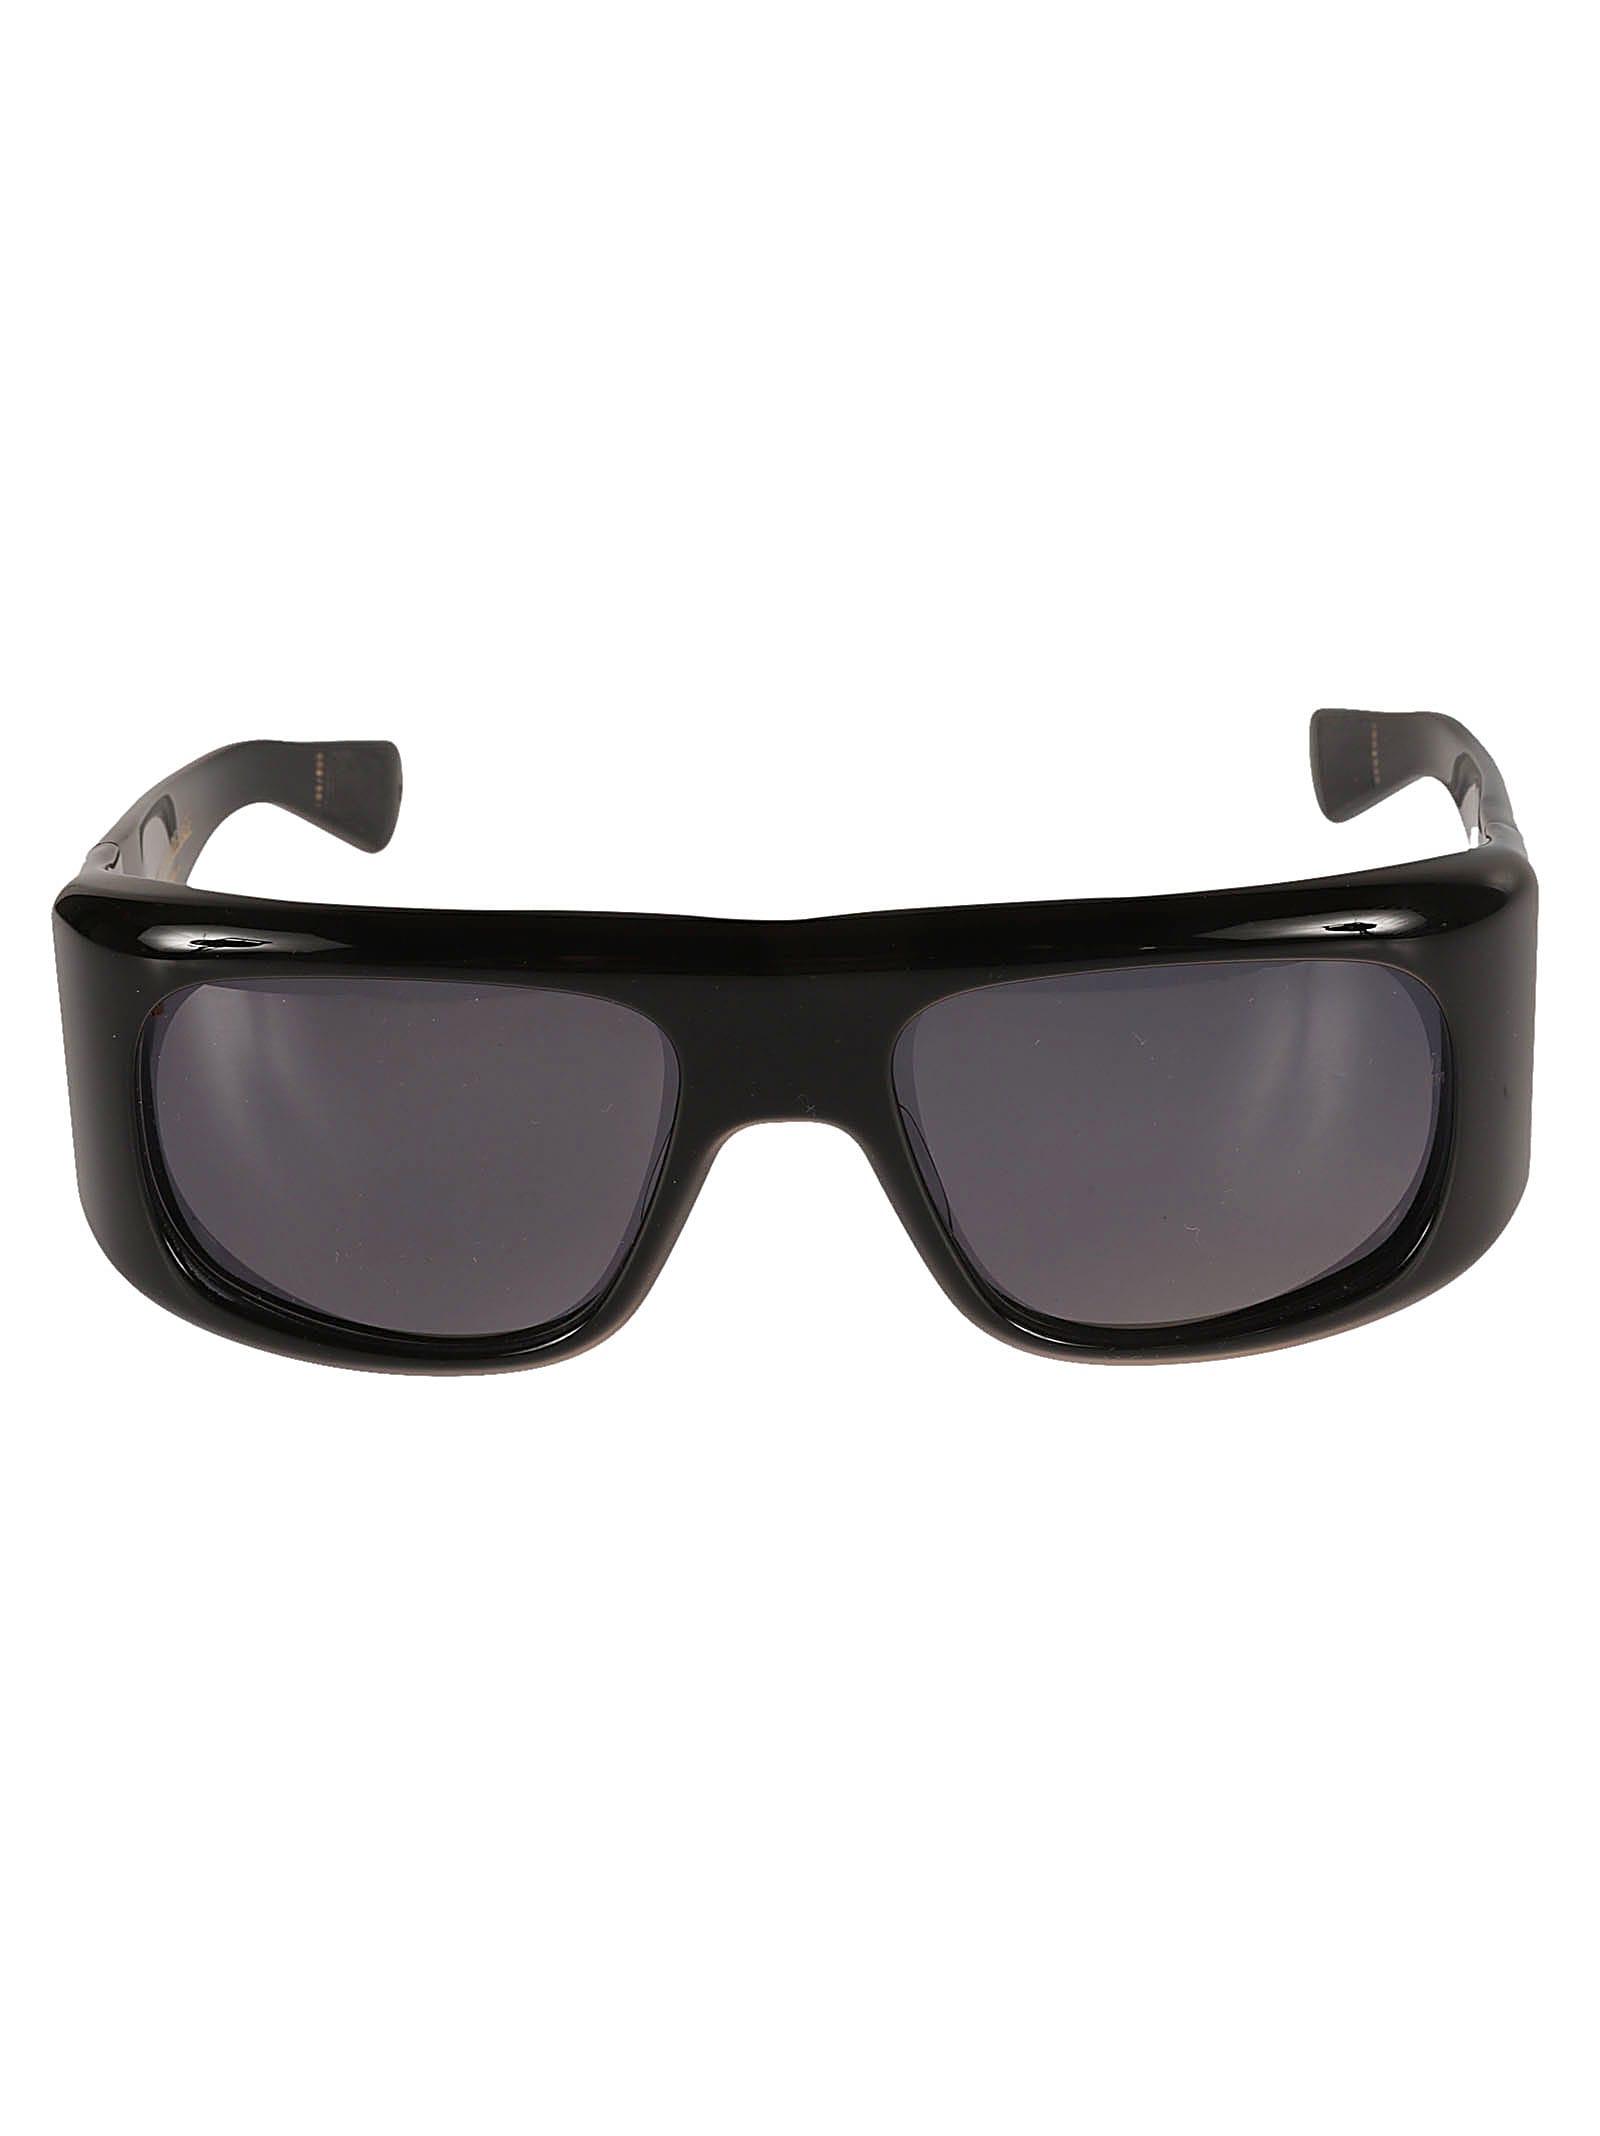 Jacques Marie Mage Benson Sunglasses In Black